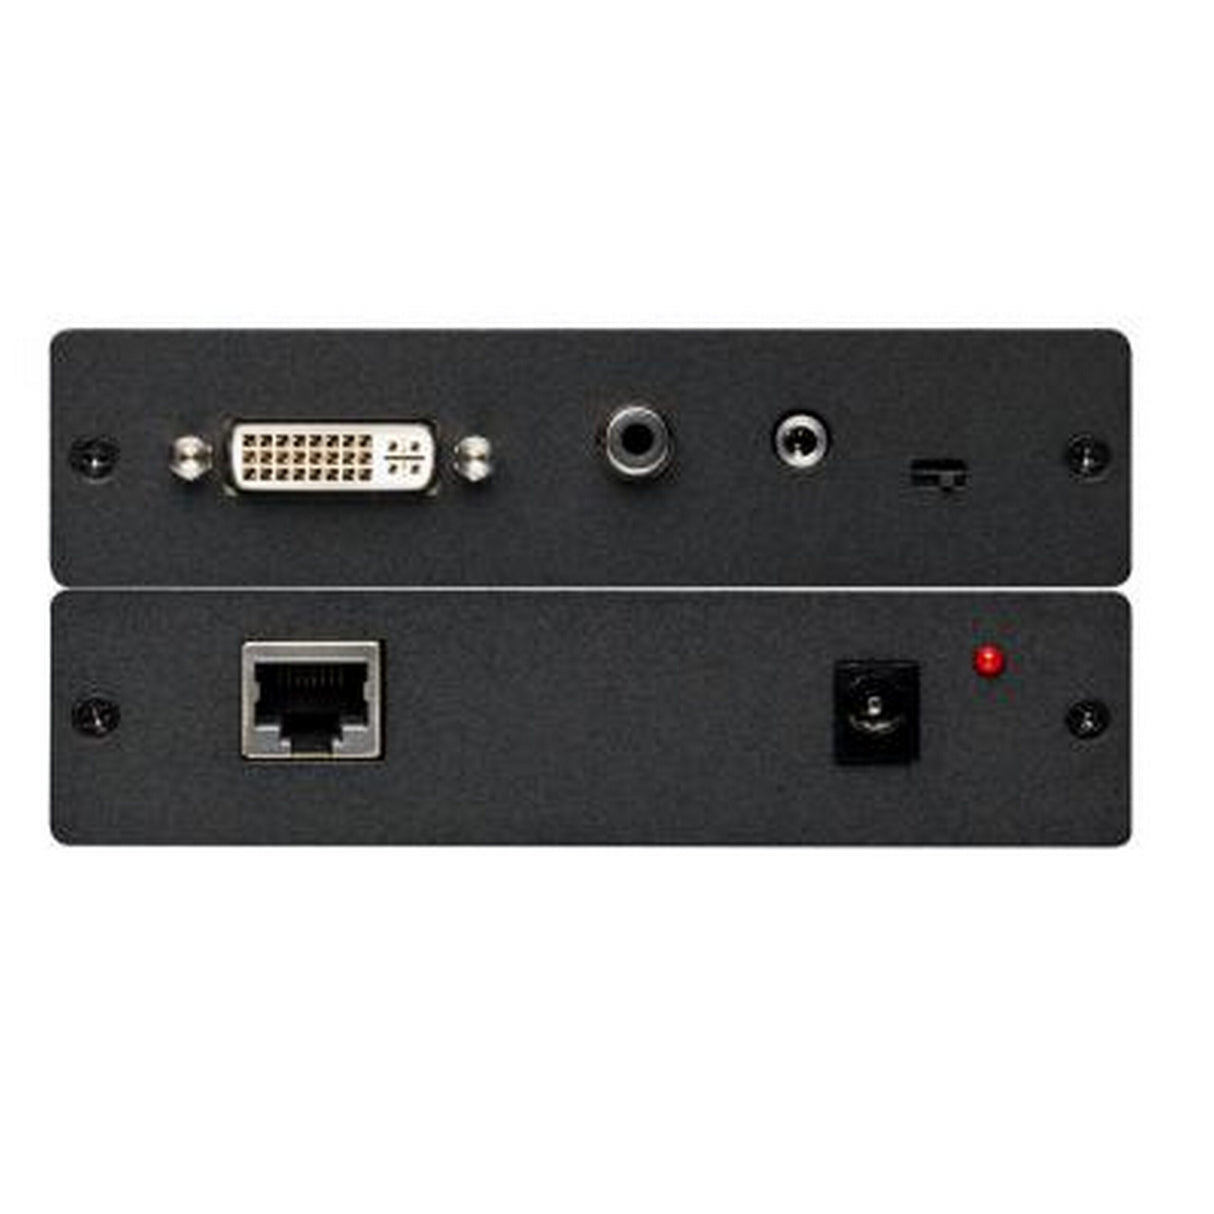 DigitaLinx DL-DVI-S DVI-D with Audio Over Twisted Pair Transmitter